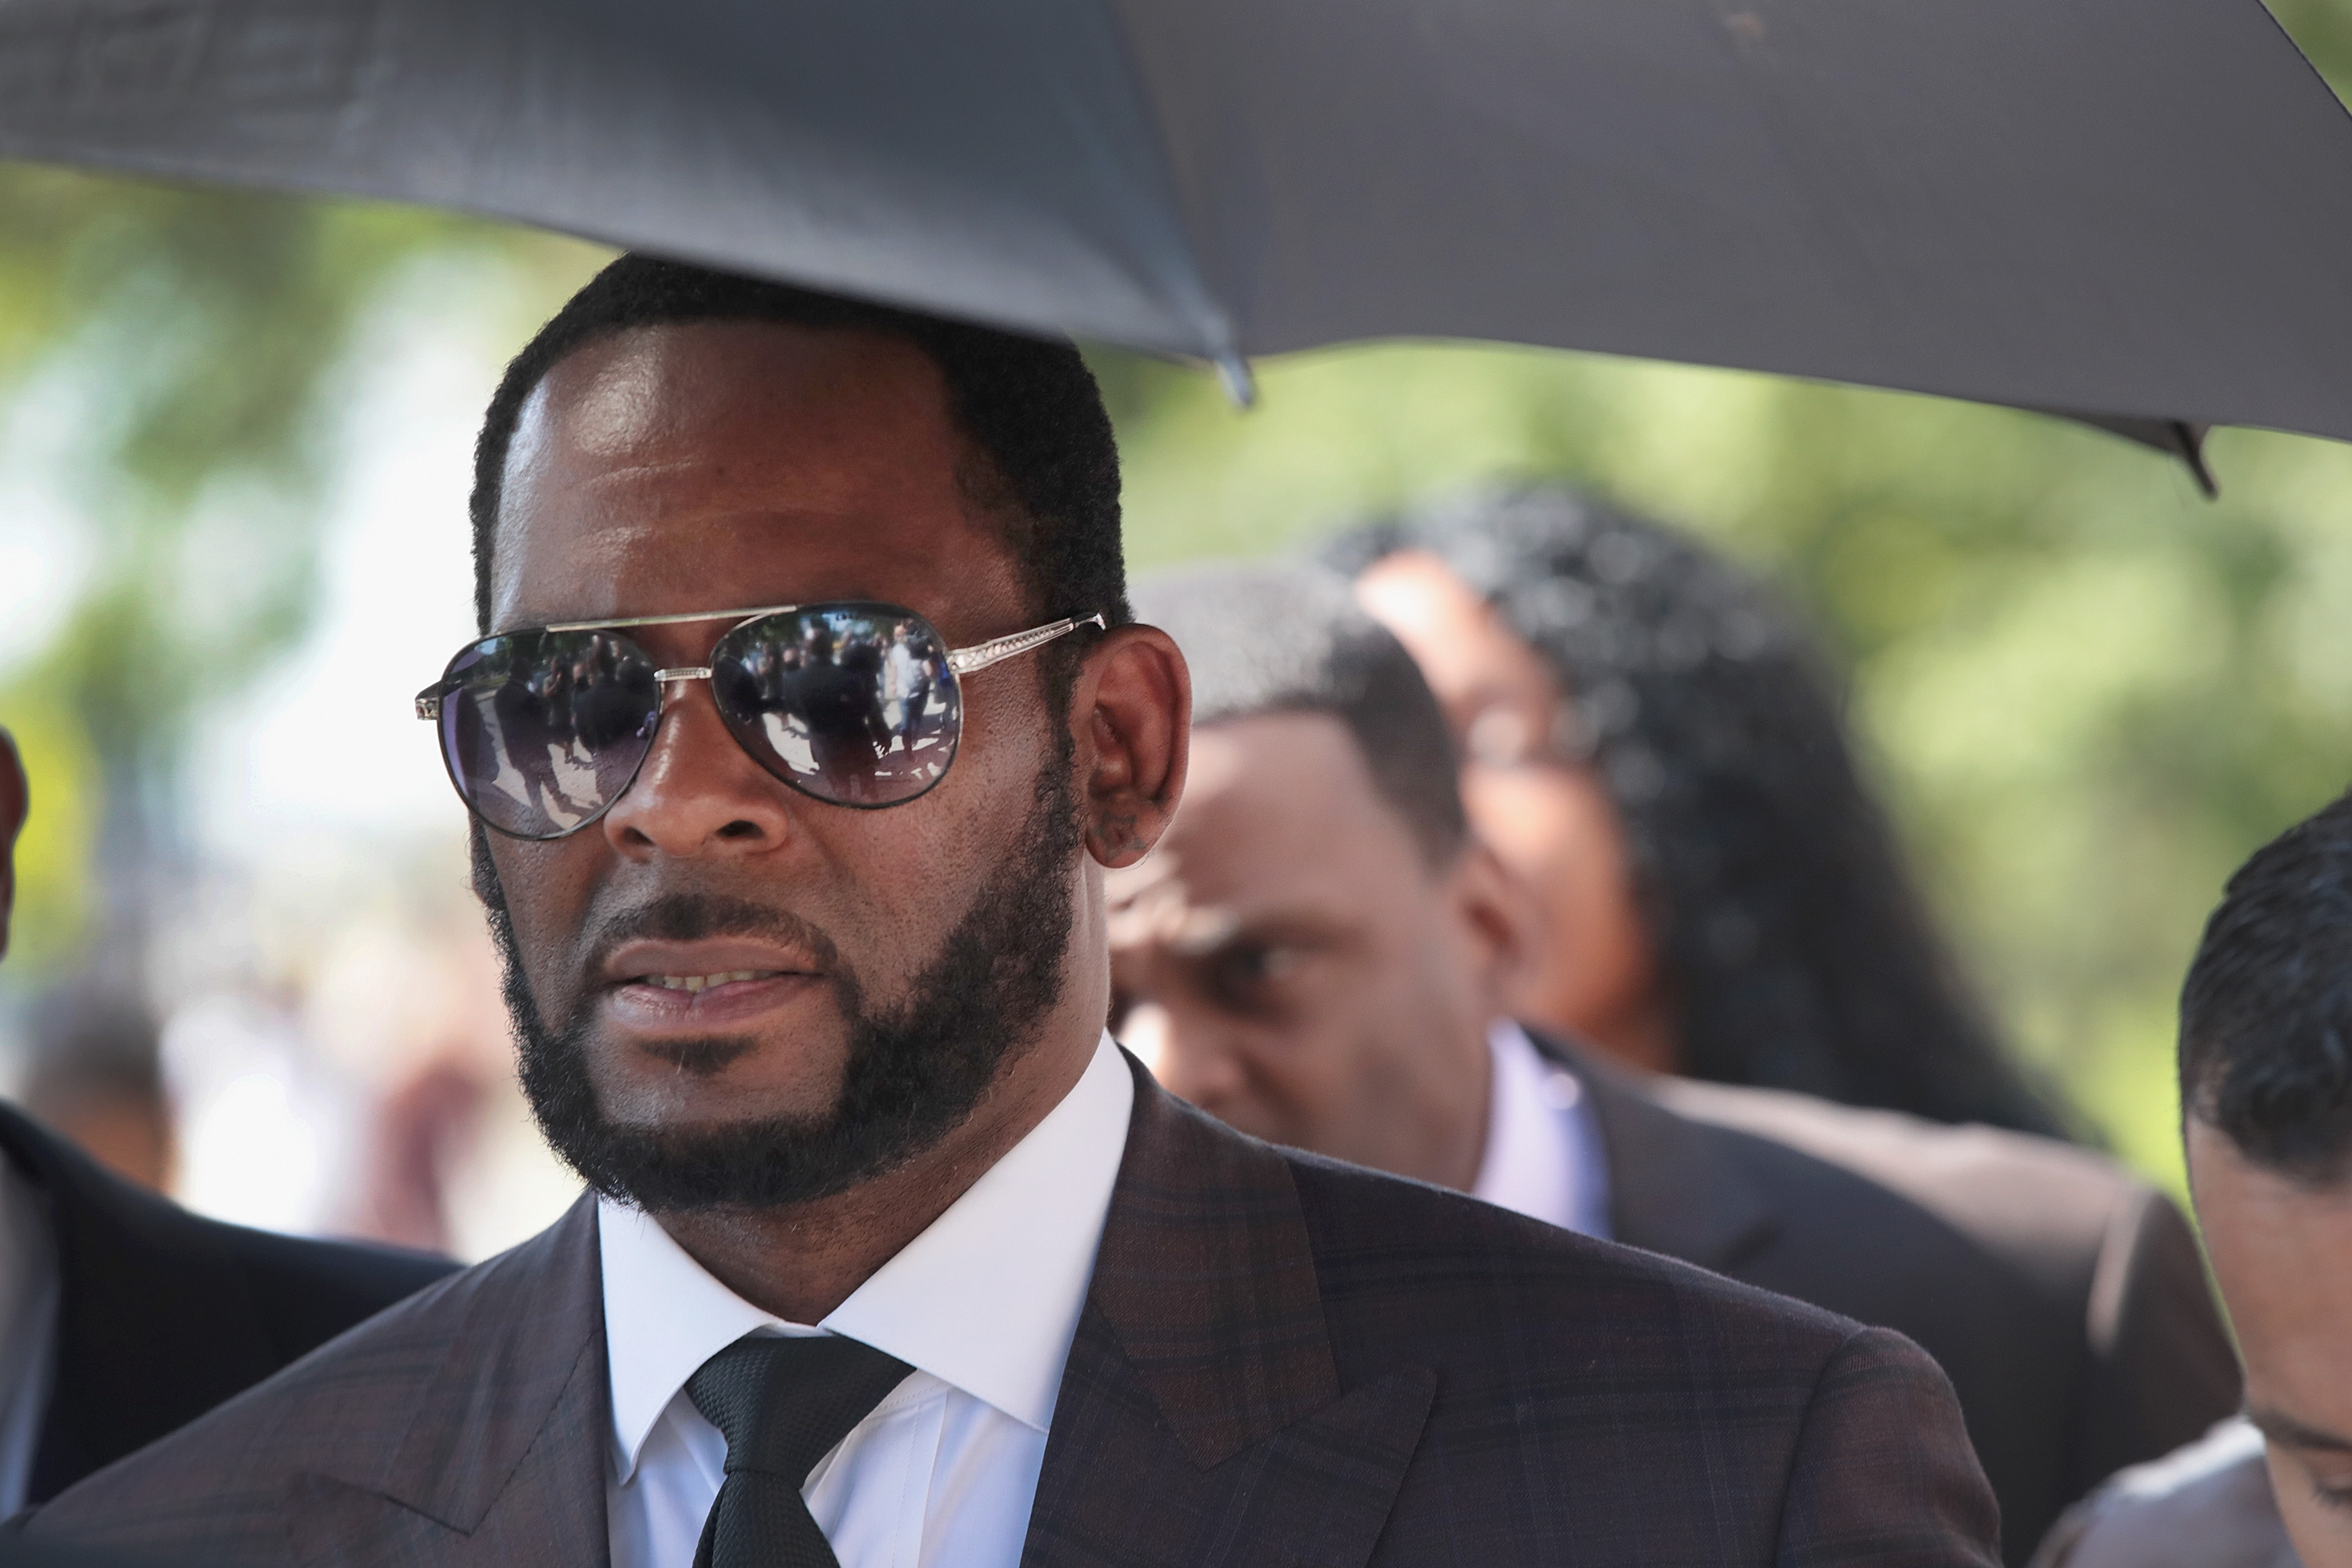 R Kelly Found Guilty of Racketeering Charges in Sex Trafficking Case